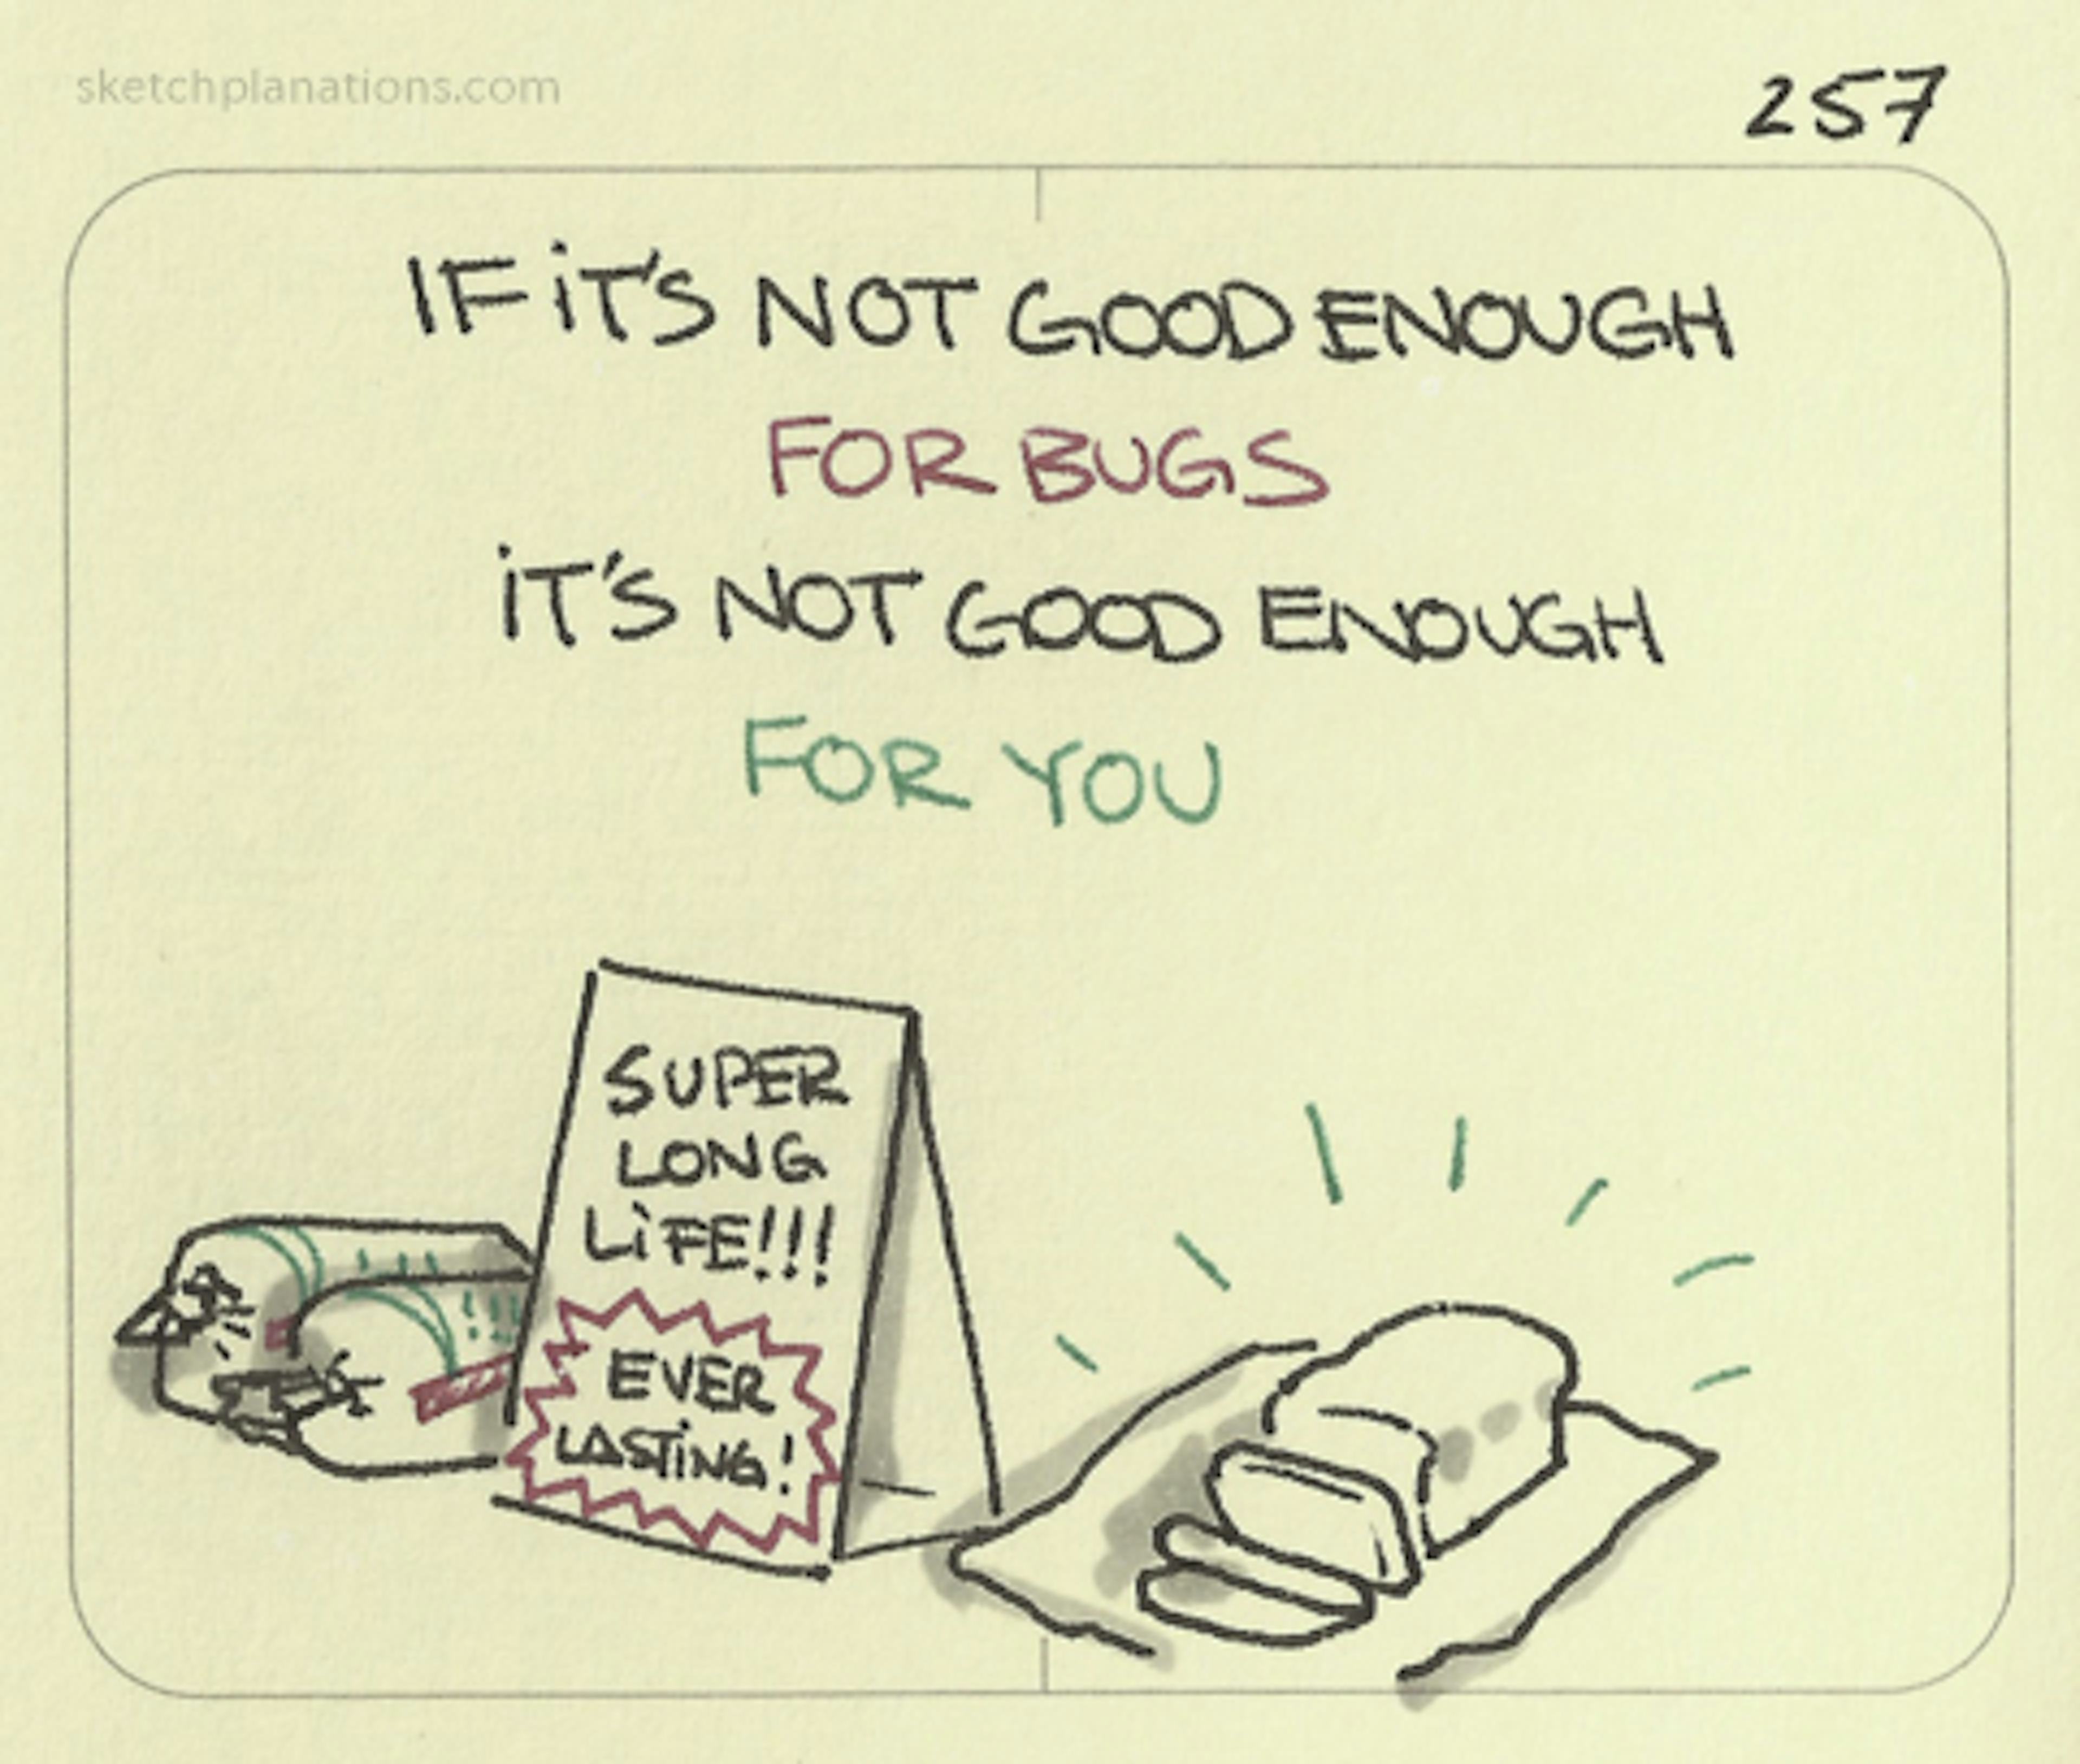 If its not good enough for bugs, it’s not good enough for you - Sketchplanations